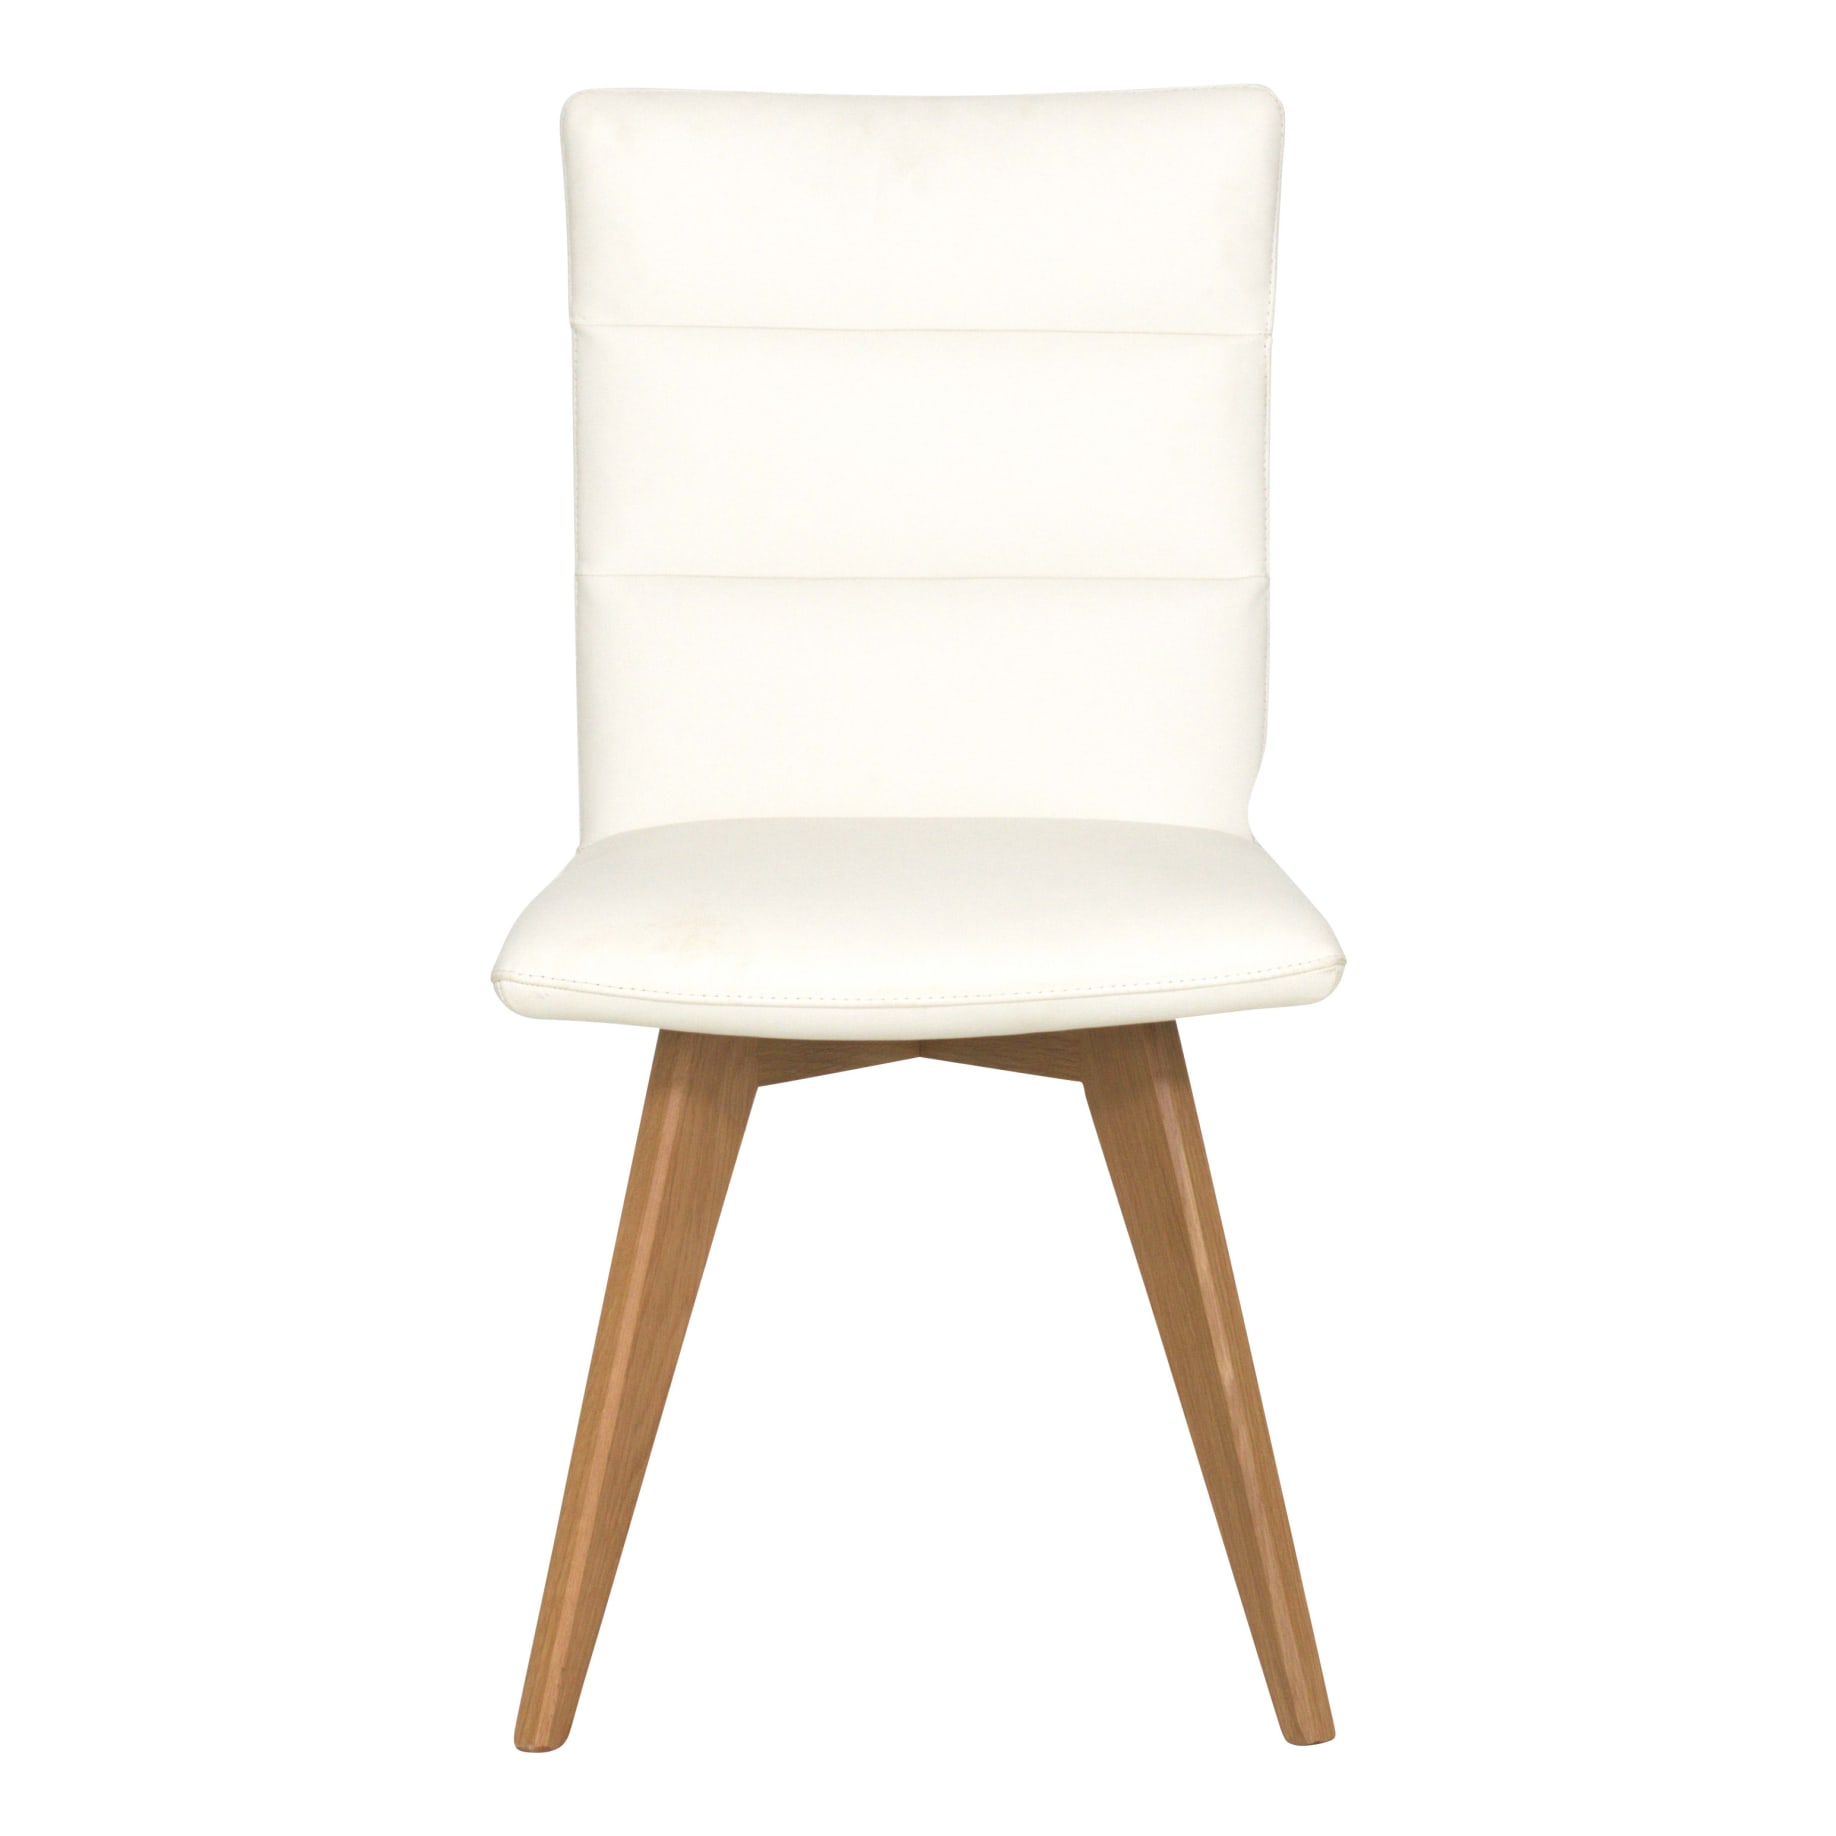 Hudson Dining Chair in White Leather/Oak Stain